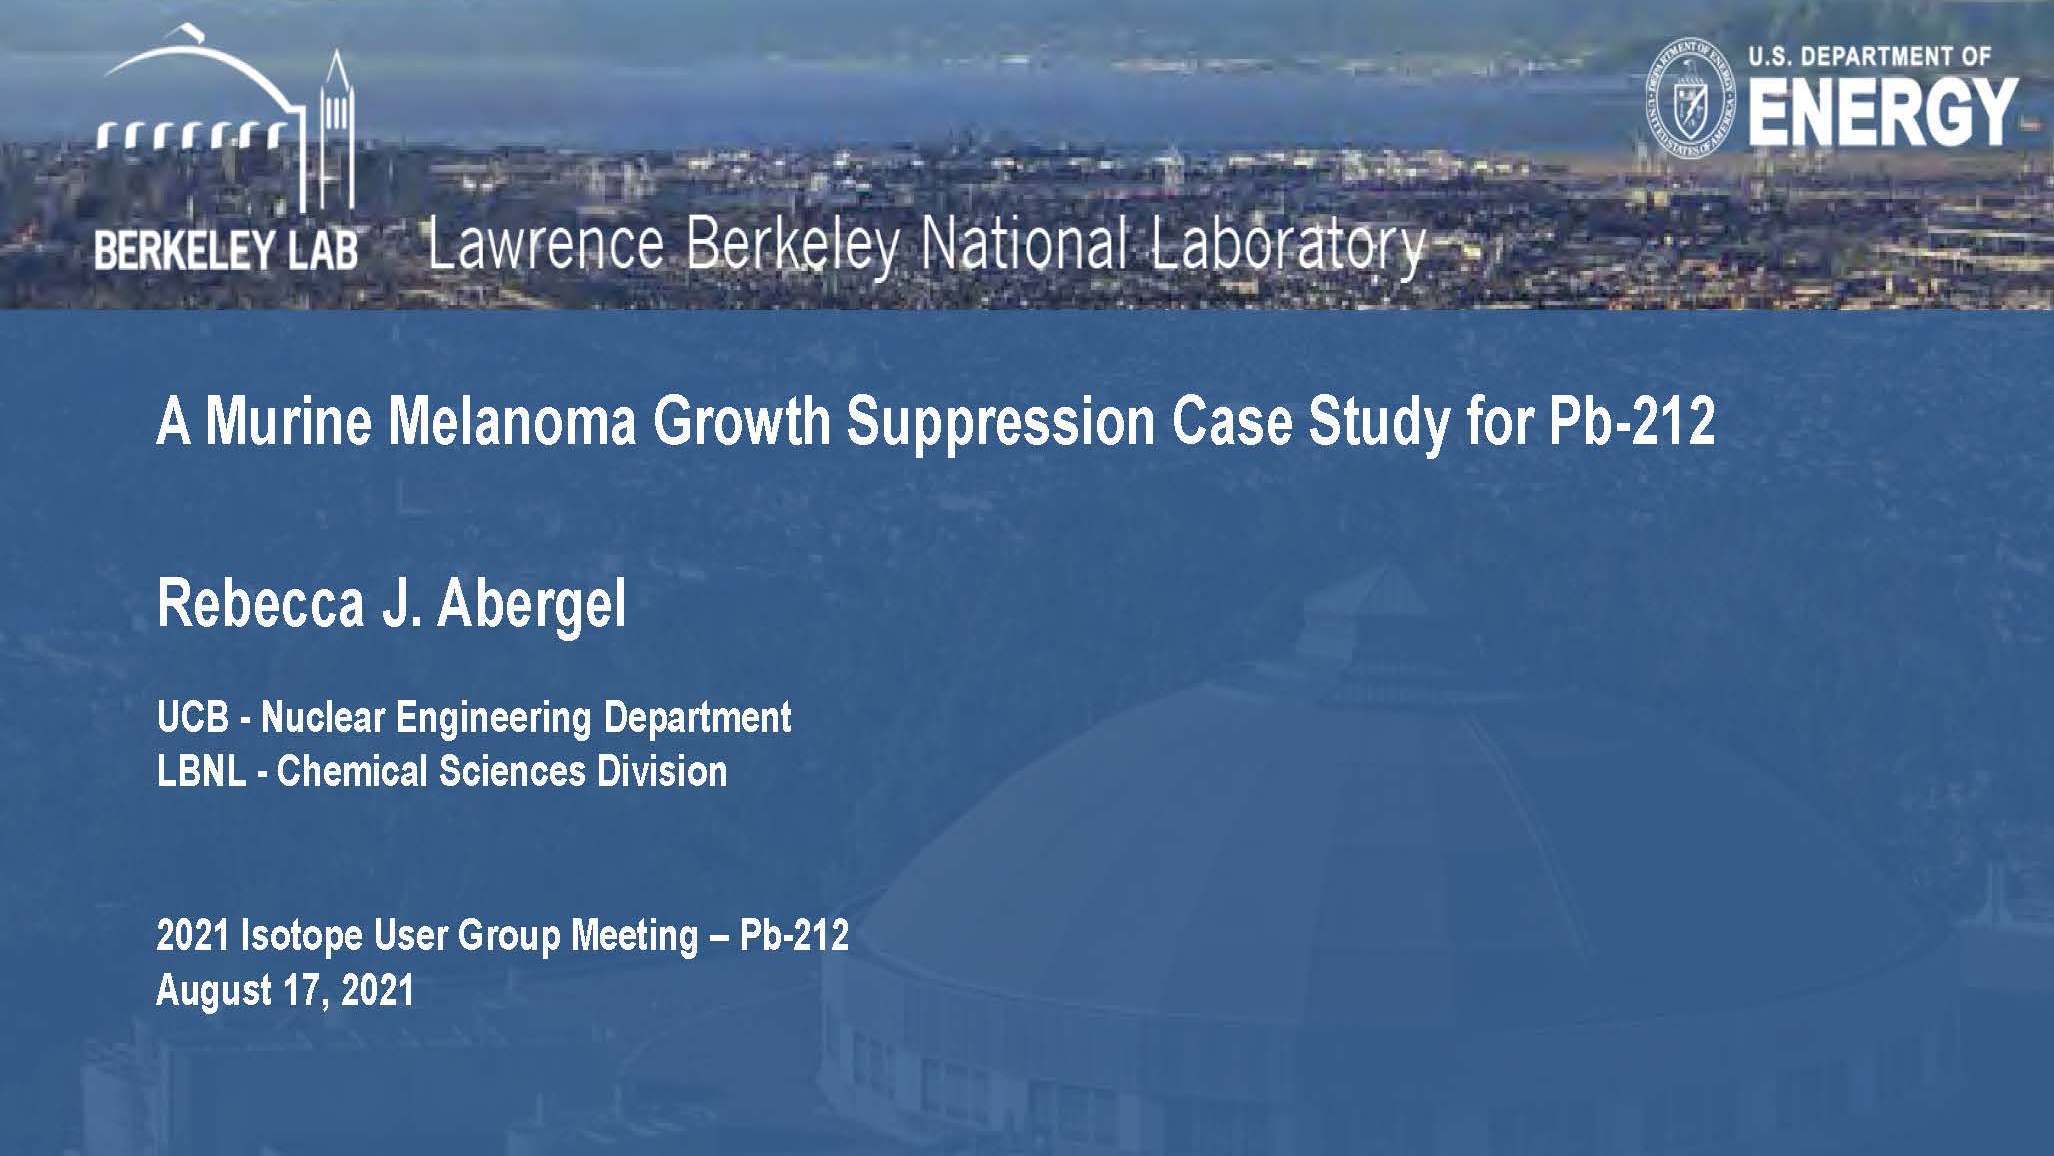 A Murine Melanoma Growth Suppression Case Study for Pb-212 by Dr. Rebecca Abergel, University of California at Berkeley